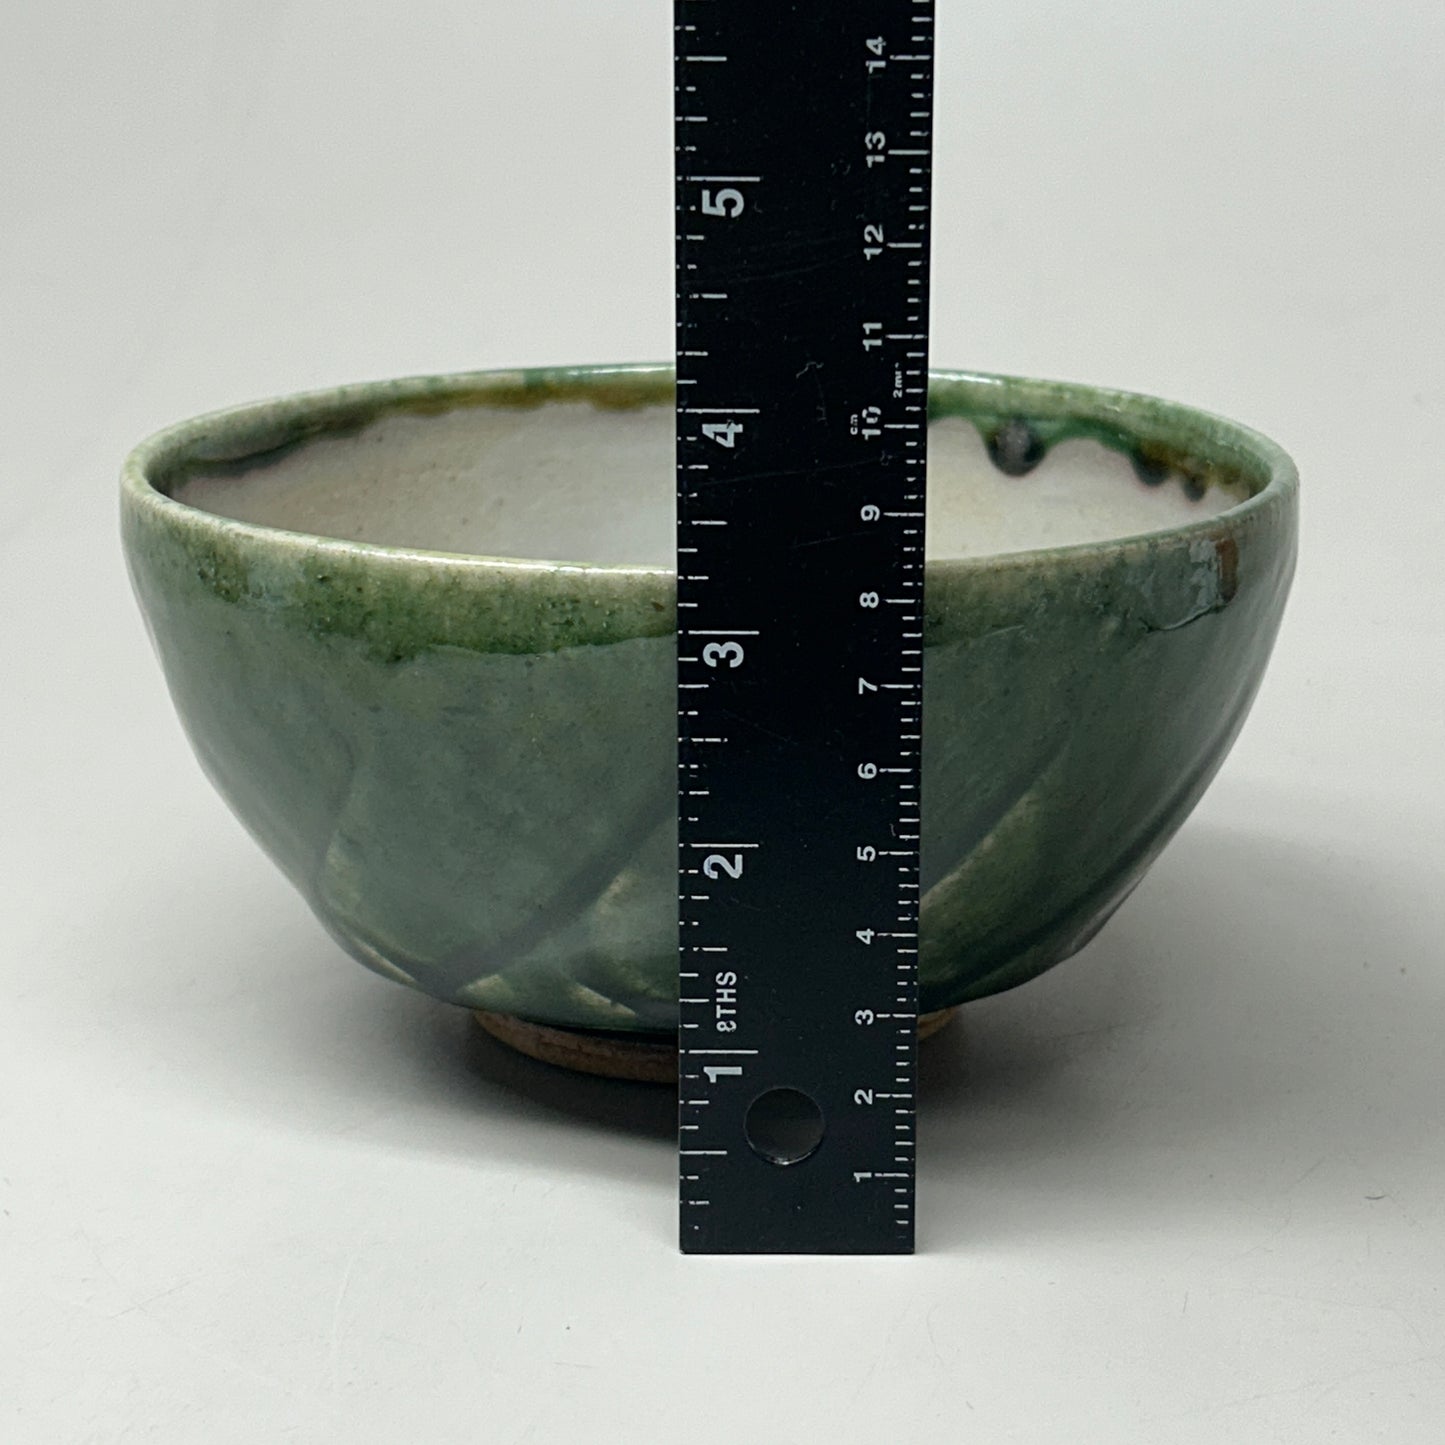 (4 PACK) Glazed Pottery Ceramic Cereal Bowls Green (New)